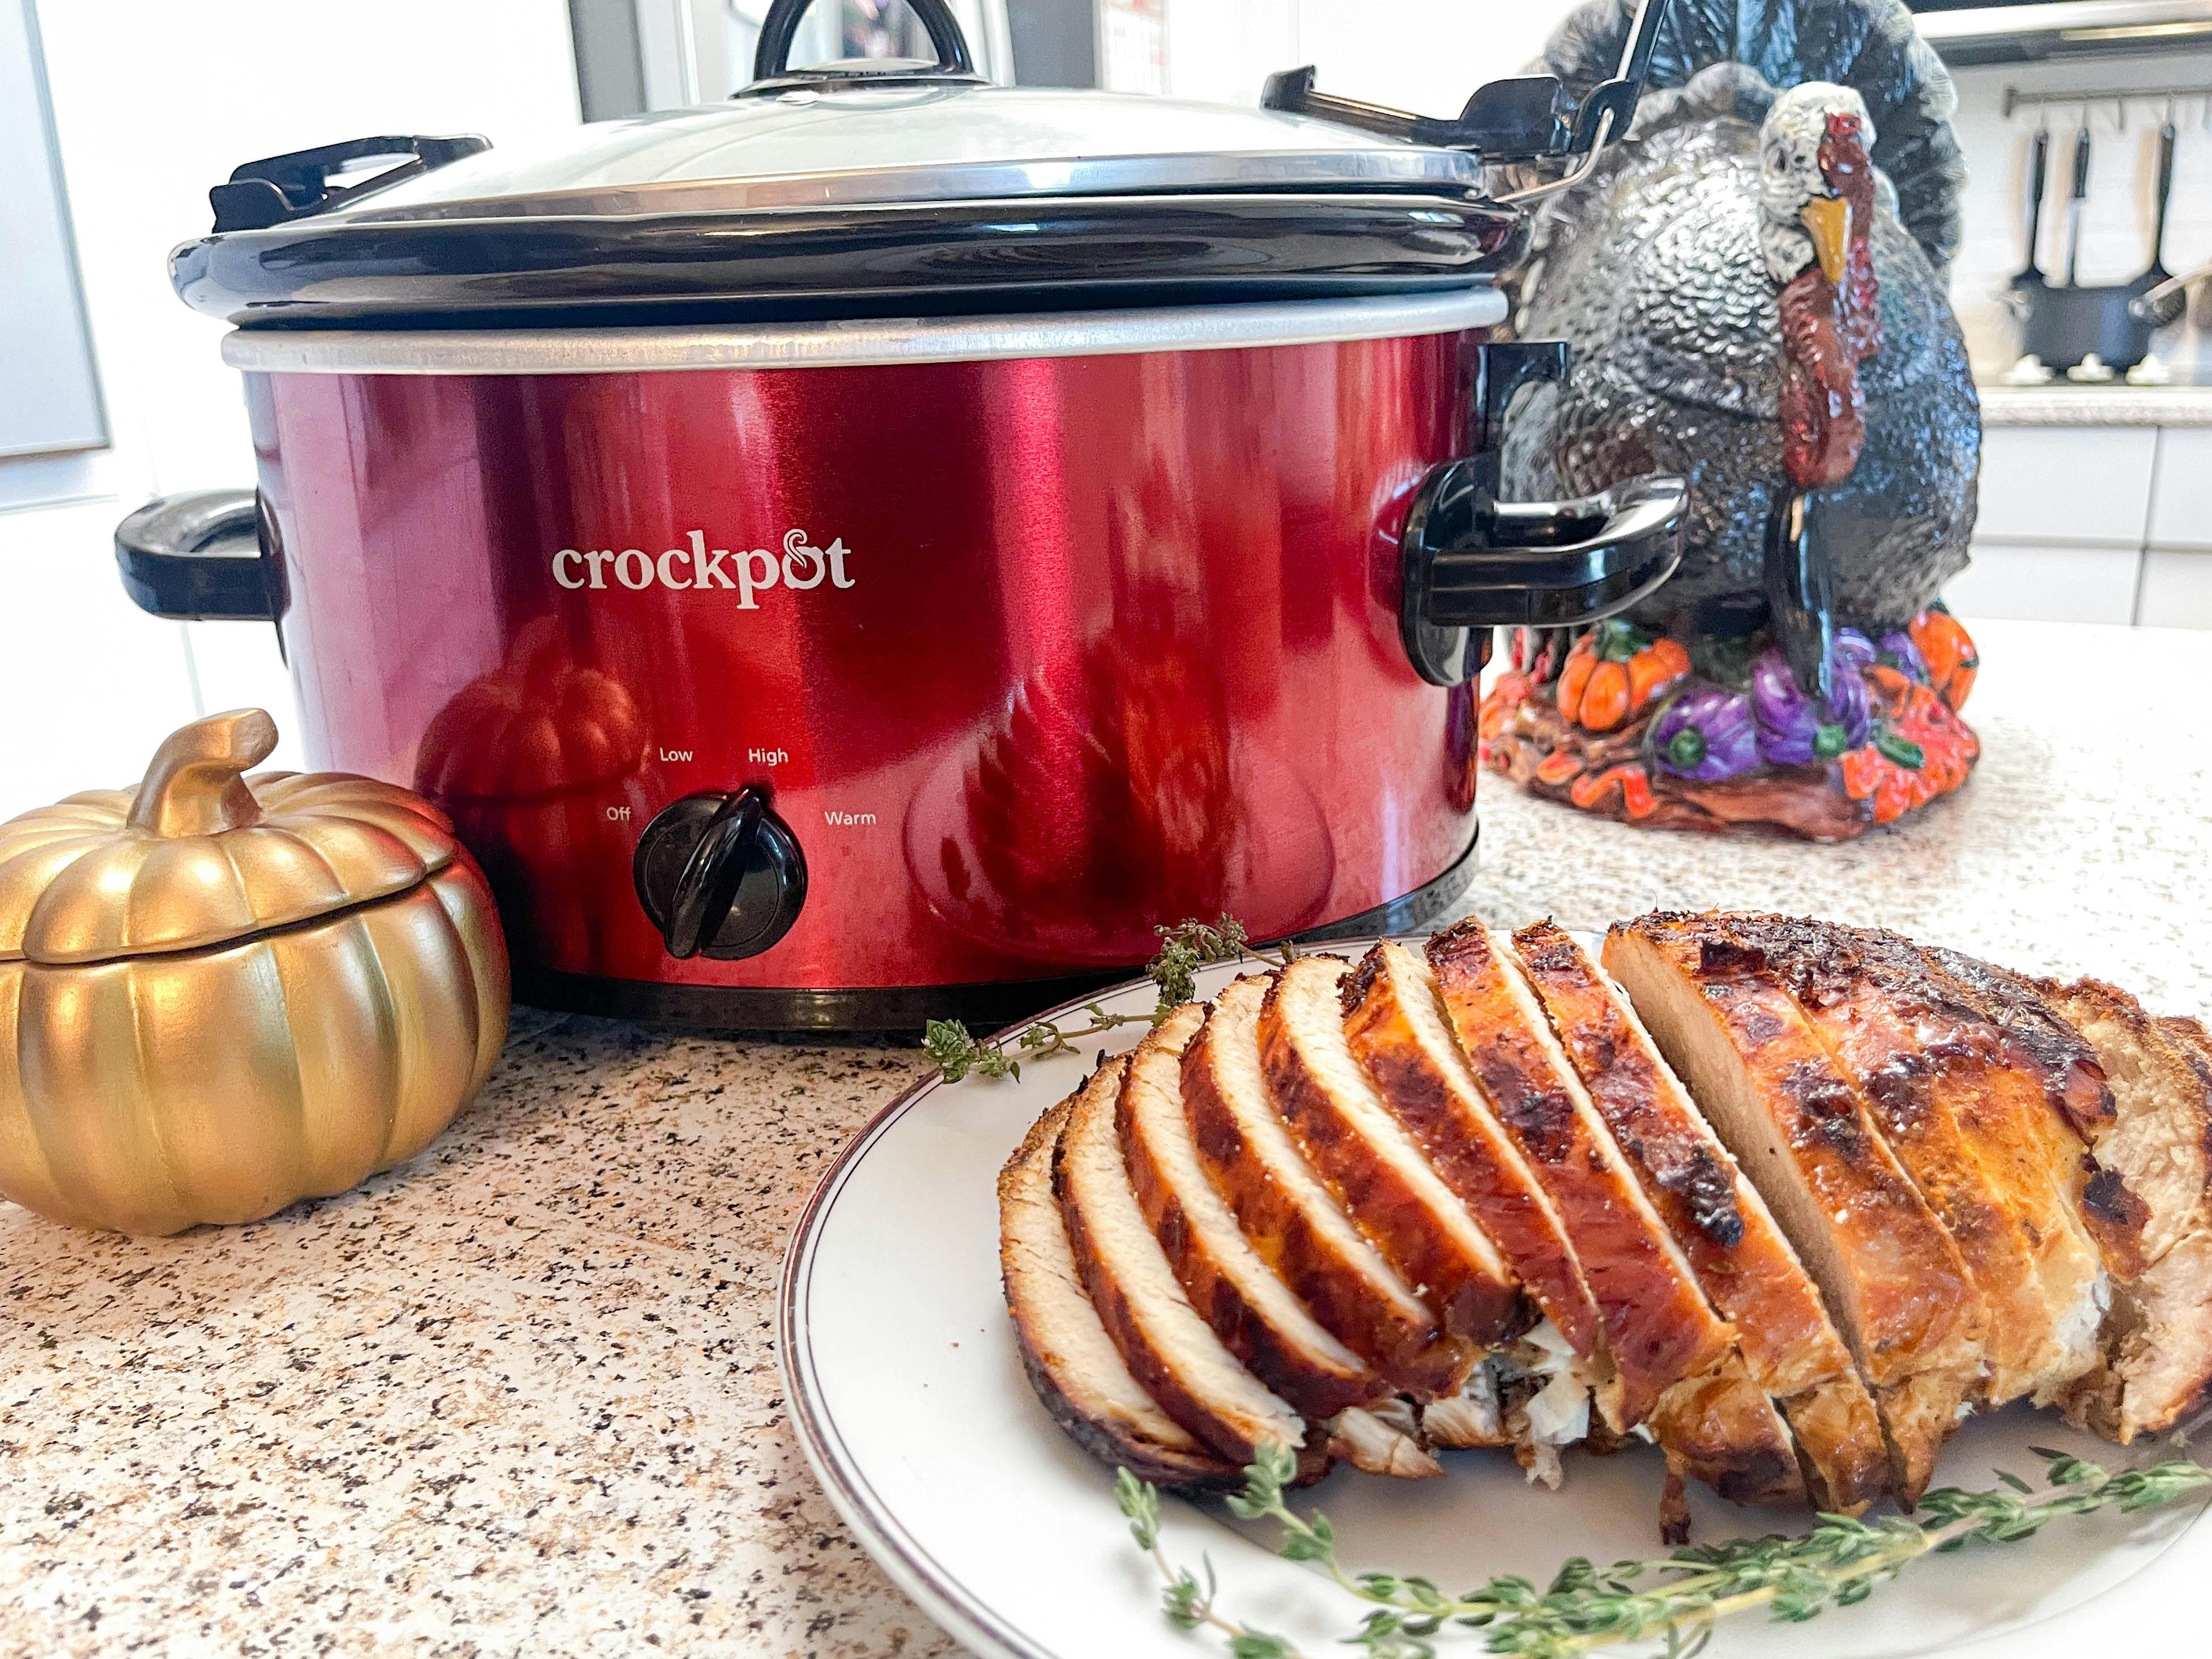 A plate of sliced turkey breast in front of a crockpot.